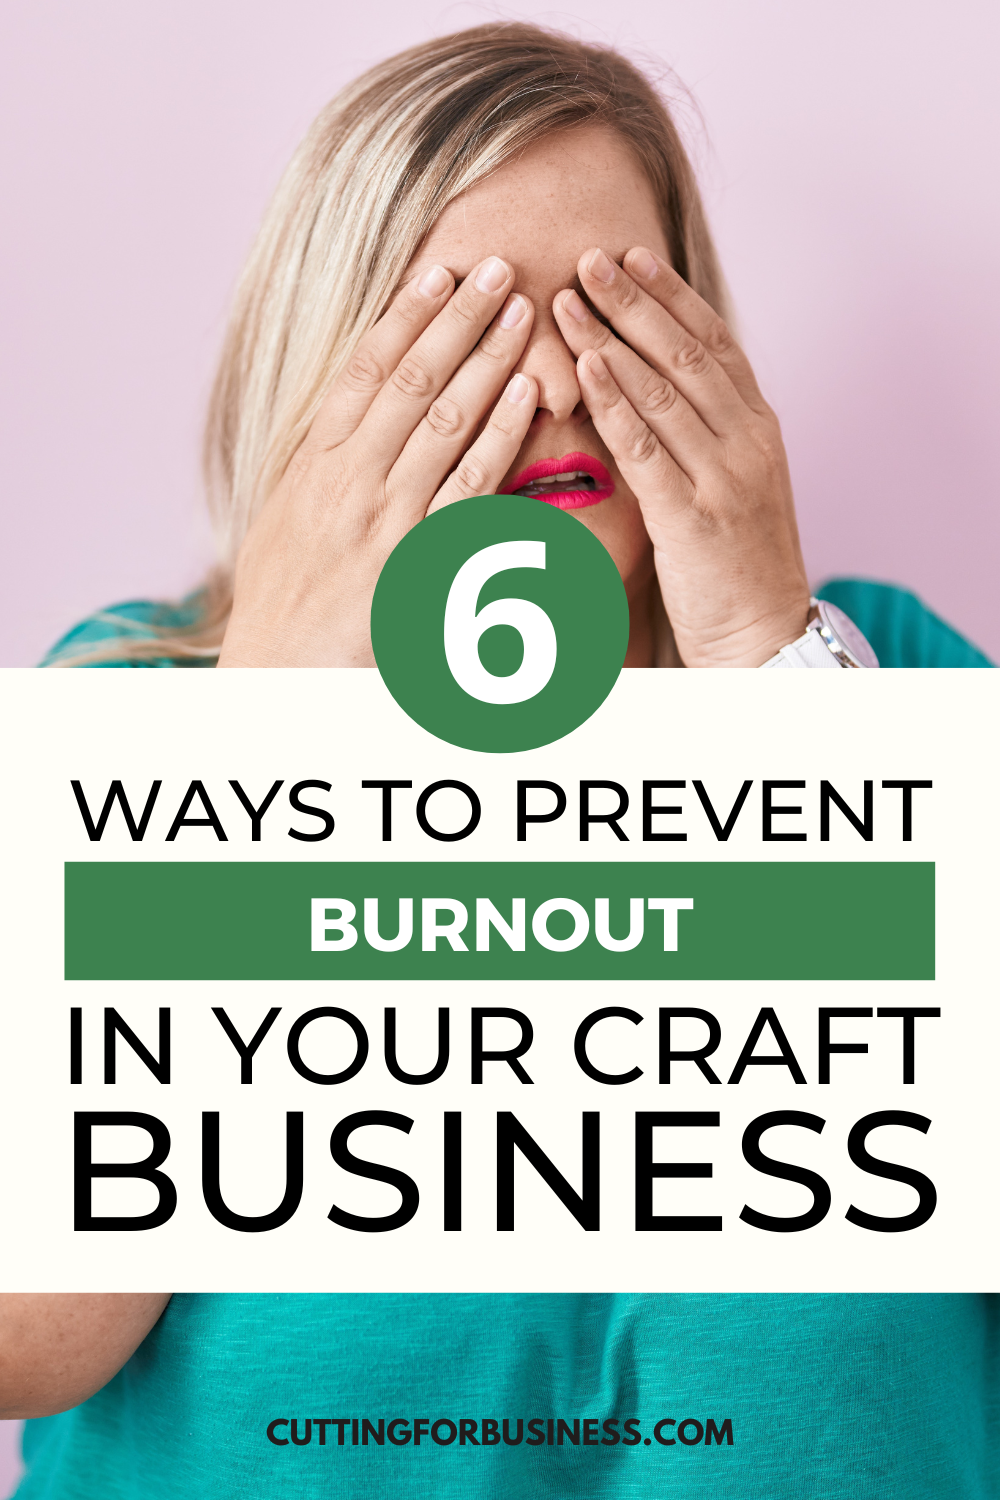 6 Ways to Prevent Burnout in Your Craft Business - cuttingforbusiness.com.